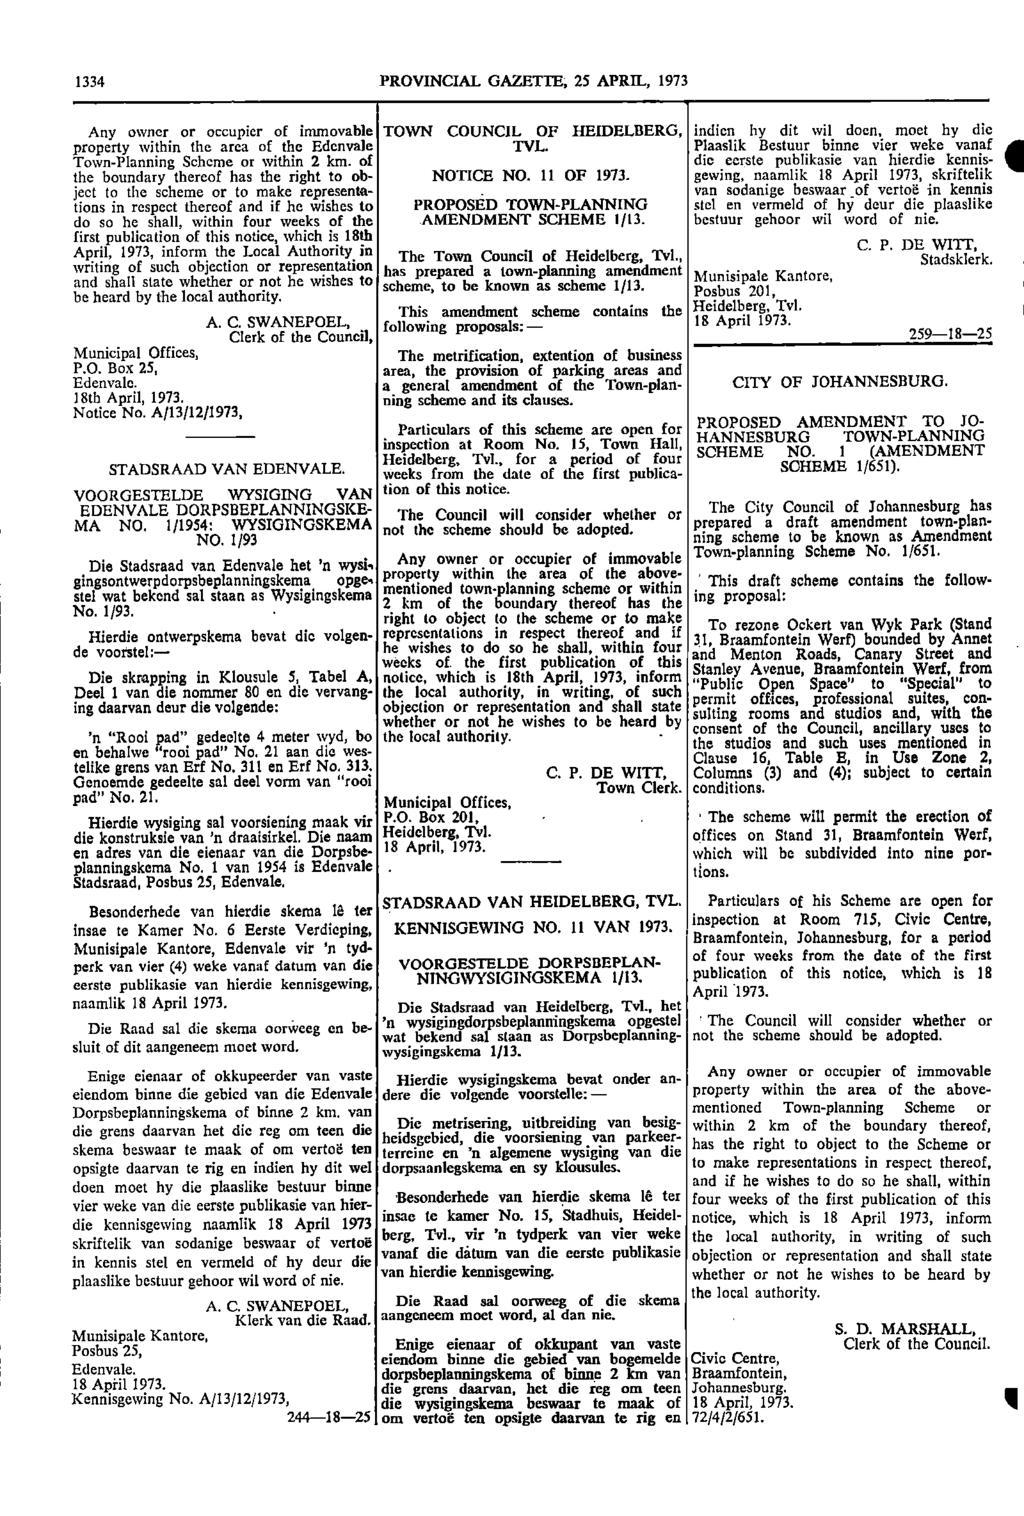 1334 PROVINCIAL GAZETTE 25 APRIL 1973 Any owner or occupier of immovable TOWN COUNCIL OF HEIDELBERG indien by dit wil doen moet hy die property within the area of the Edenvale TVL Plaaslik Bestuur